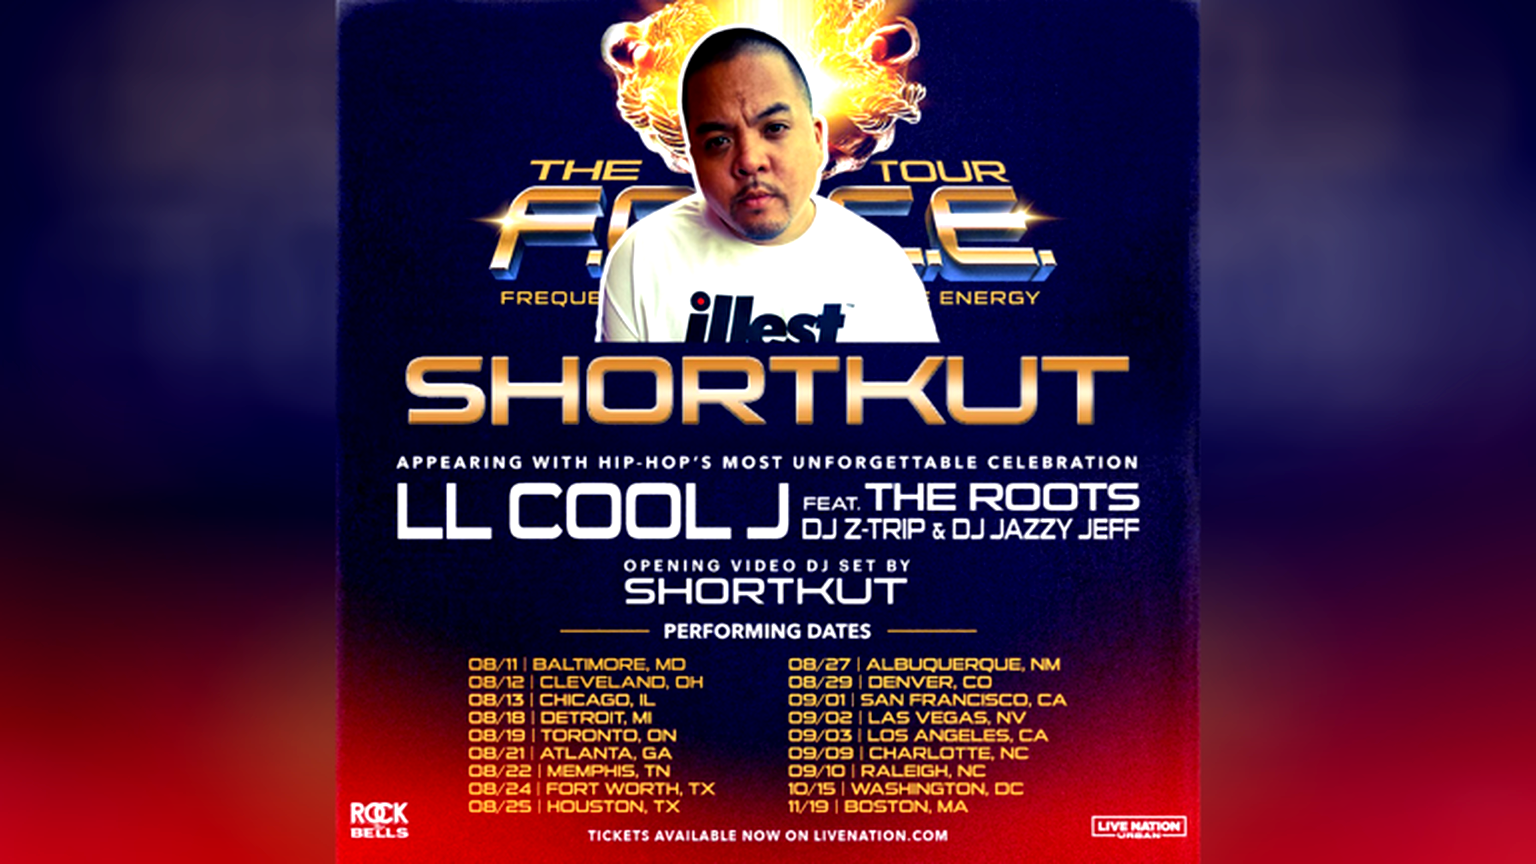 Interview: DJ Shortkut joins LL Cool J’s F.O.R.C.E. Tour in celebration of hip-hop’s 50th anniversary